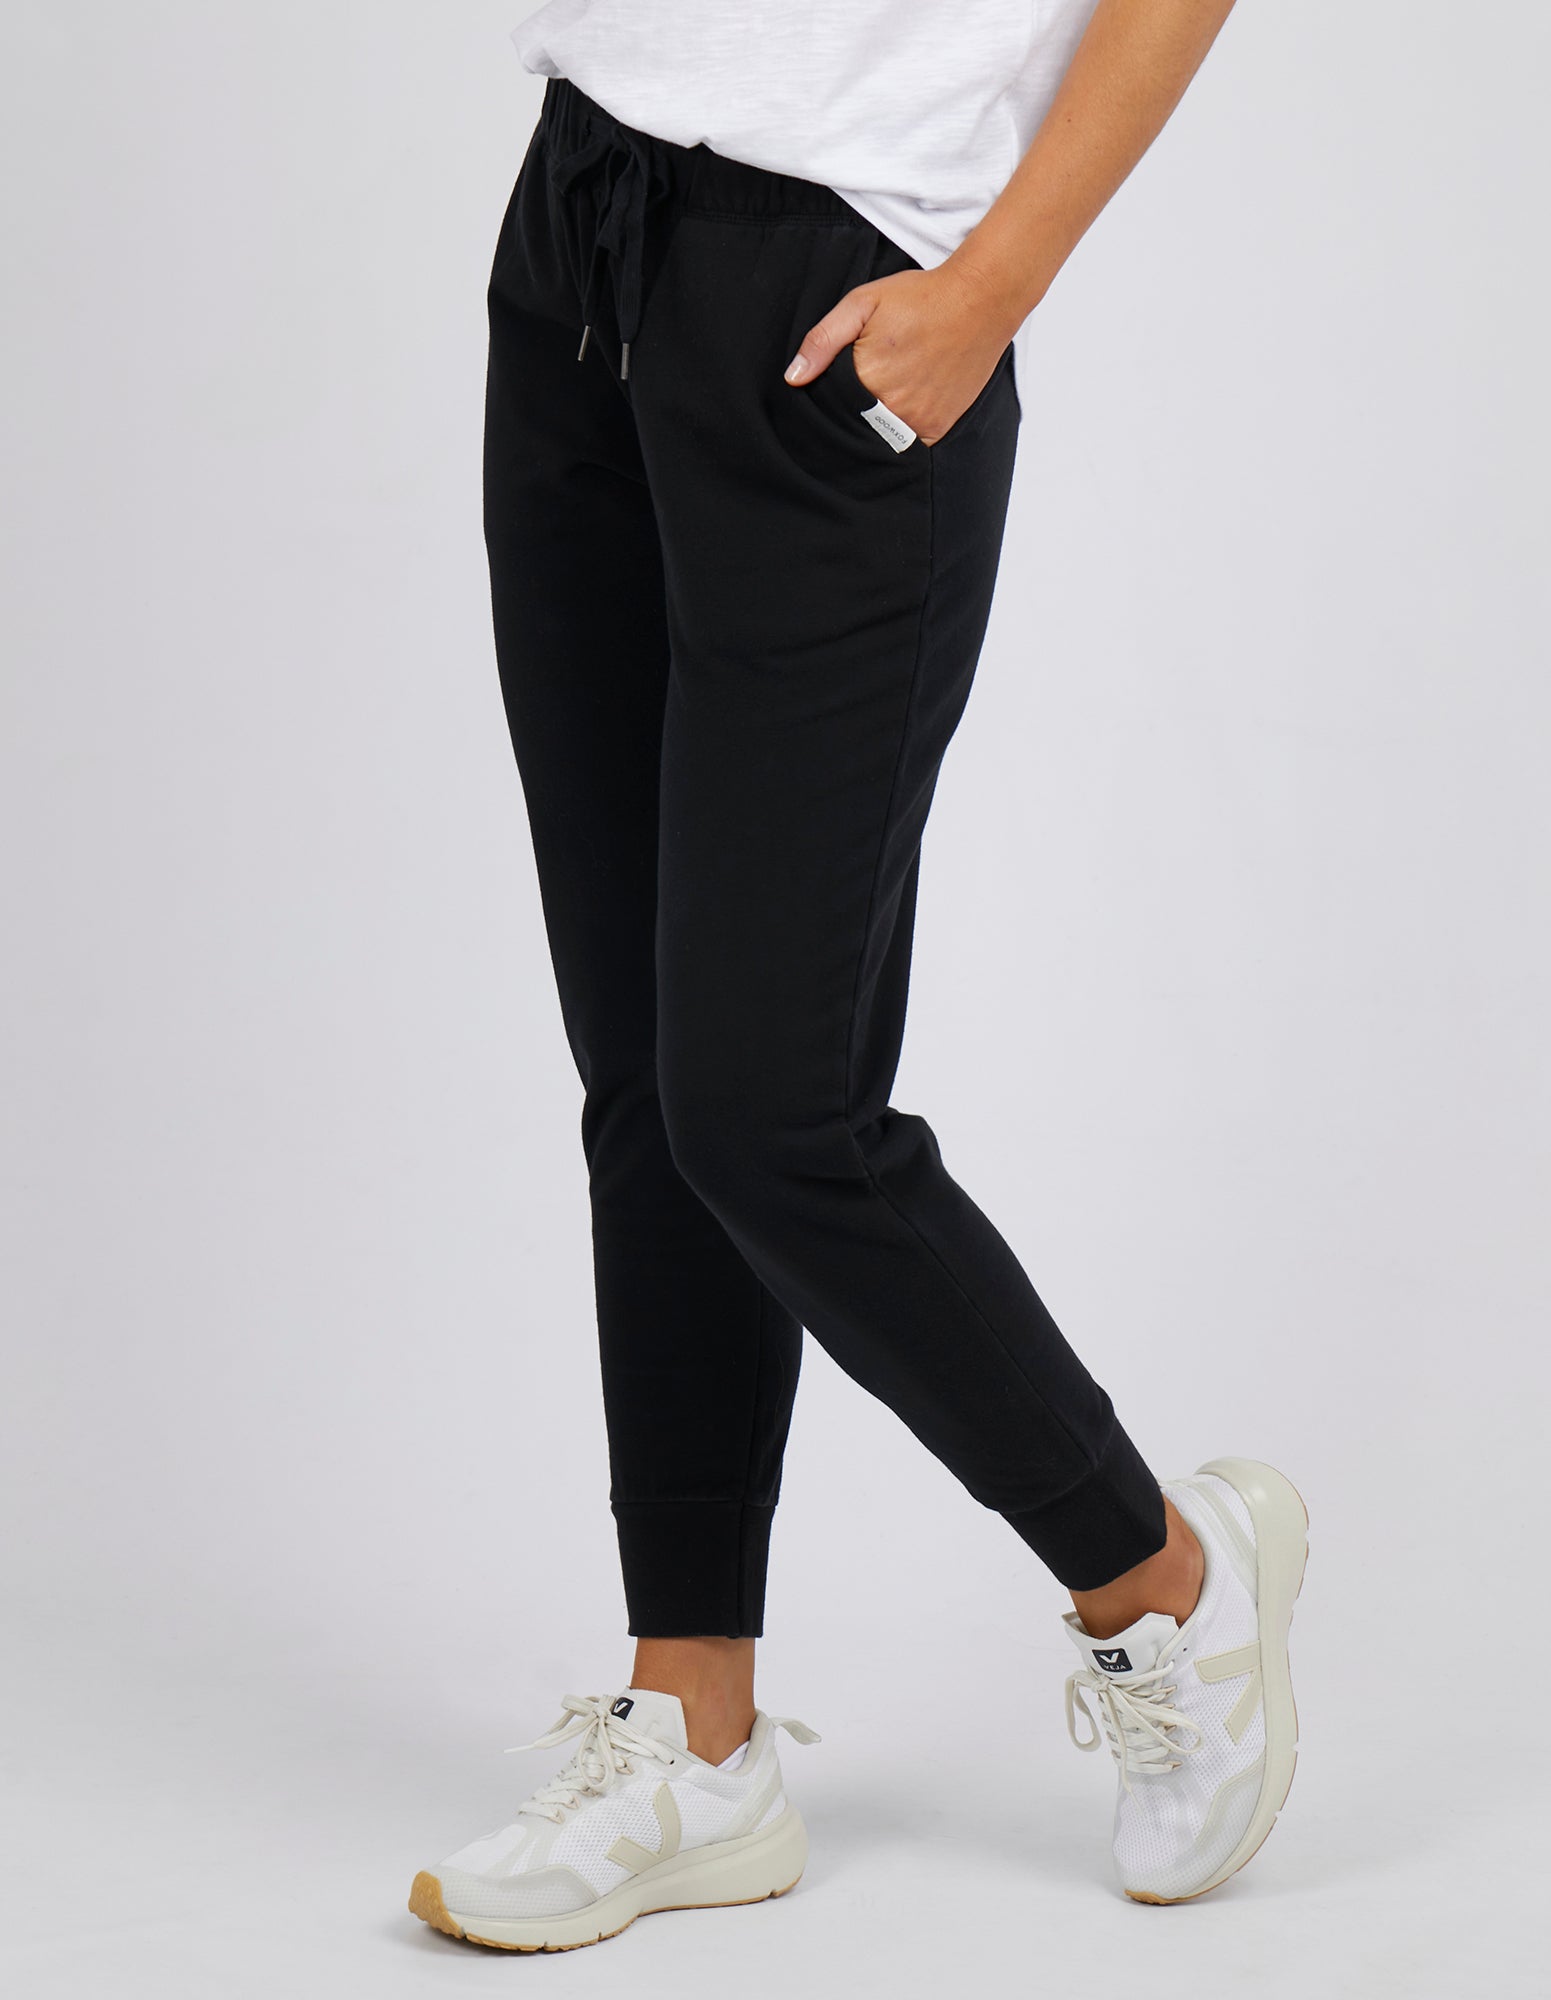 FOXWOOD LAZY DAYS PANT - BLACK - THE VOGUE STORE